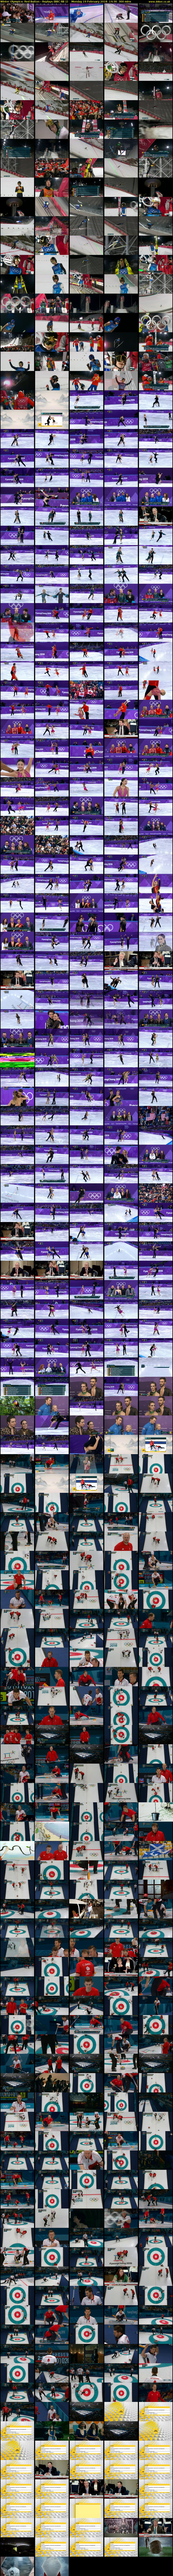 Winter Olympics: Red Button - Replays (BBC RB 1) Monday 19 February 2018 14:30 - 19:30